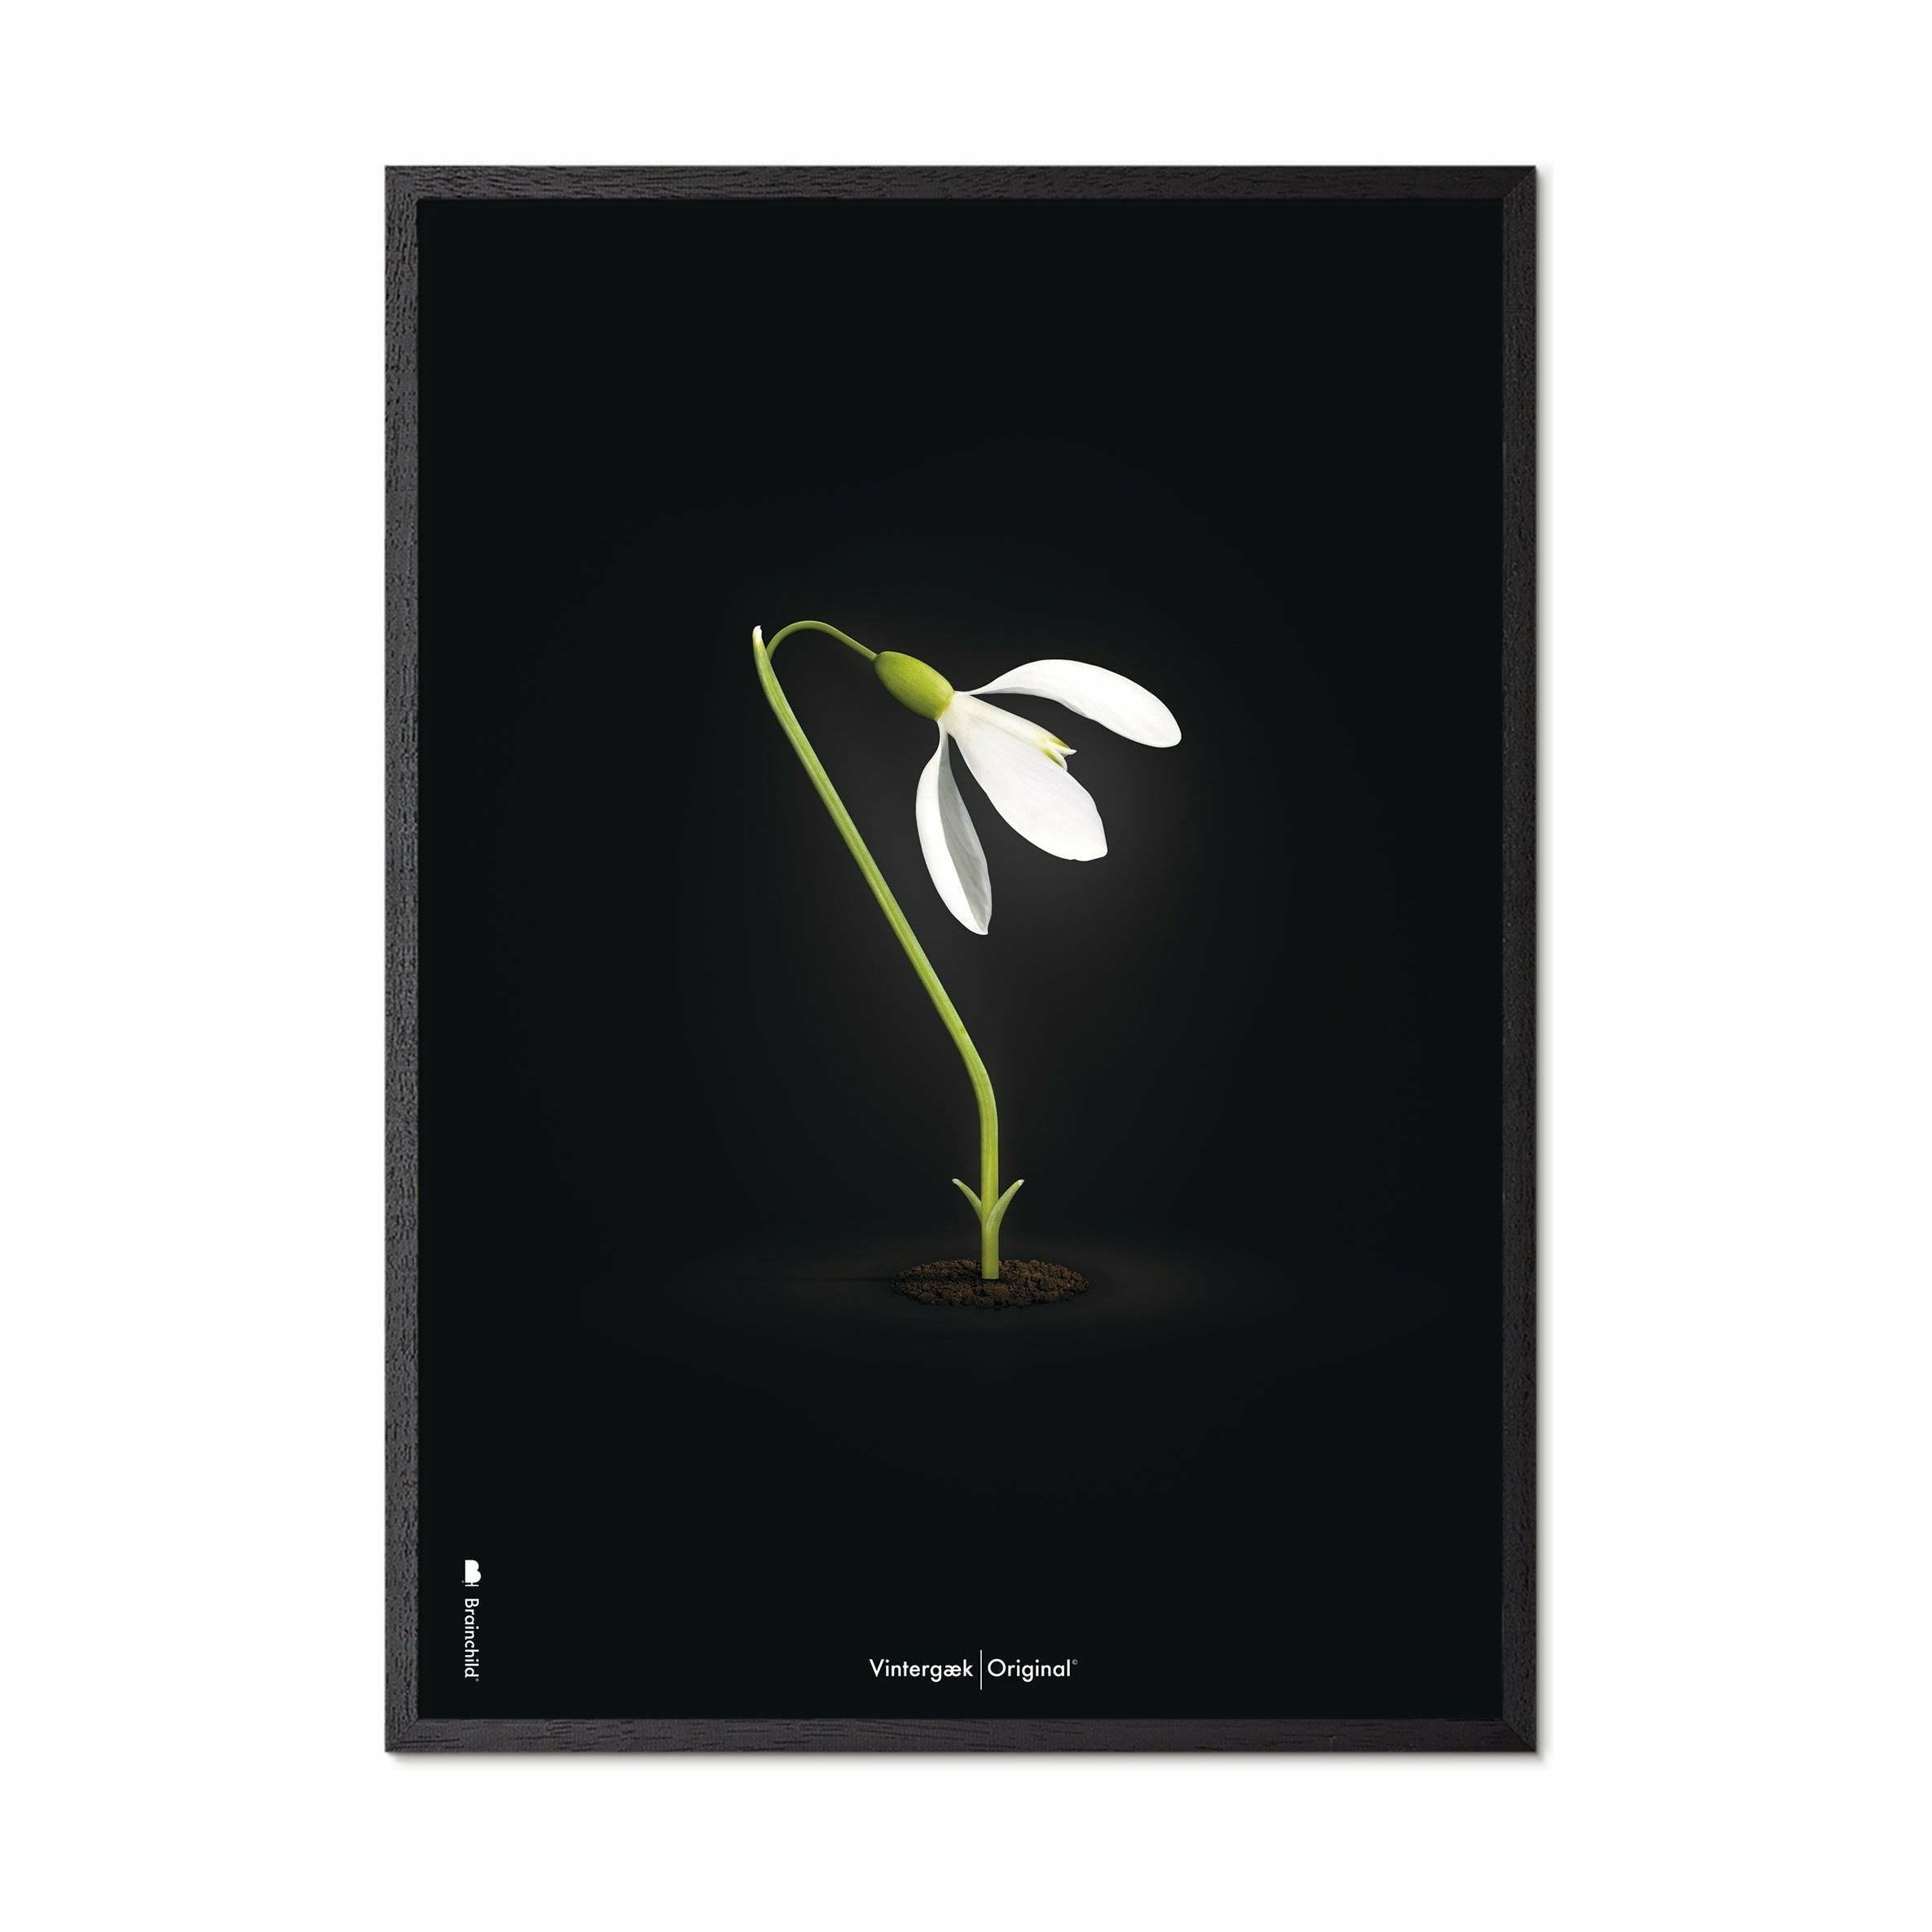 Brainchild Snowdrop Classic Poster, Frame In Black Lacquered Wood 70x100 Cm, Black Background